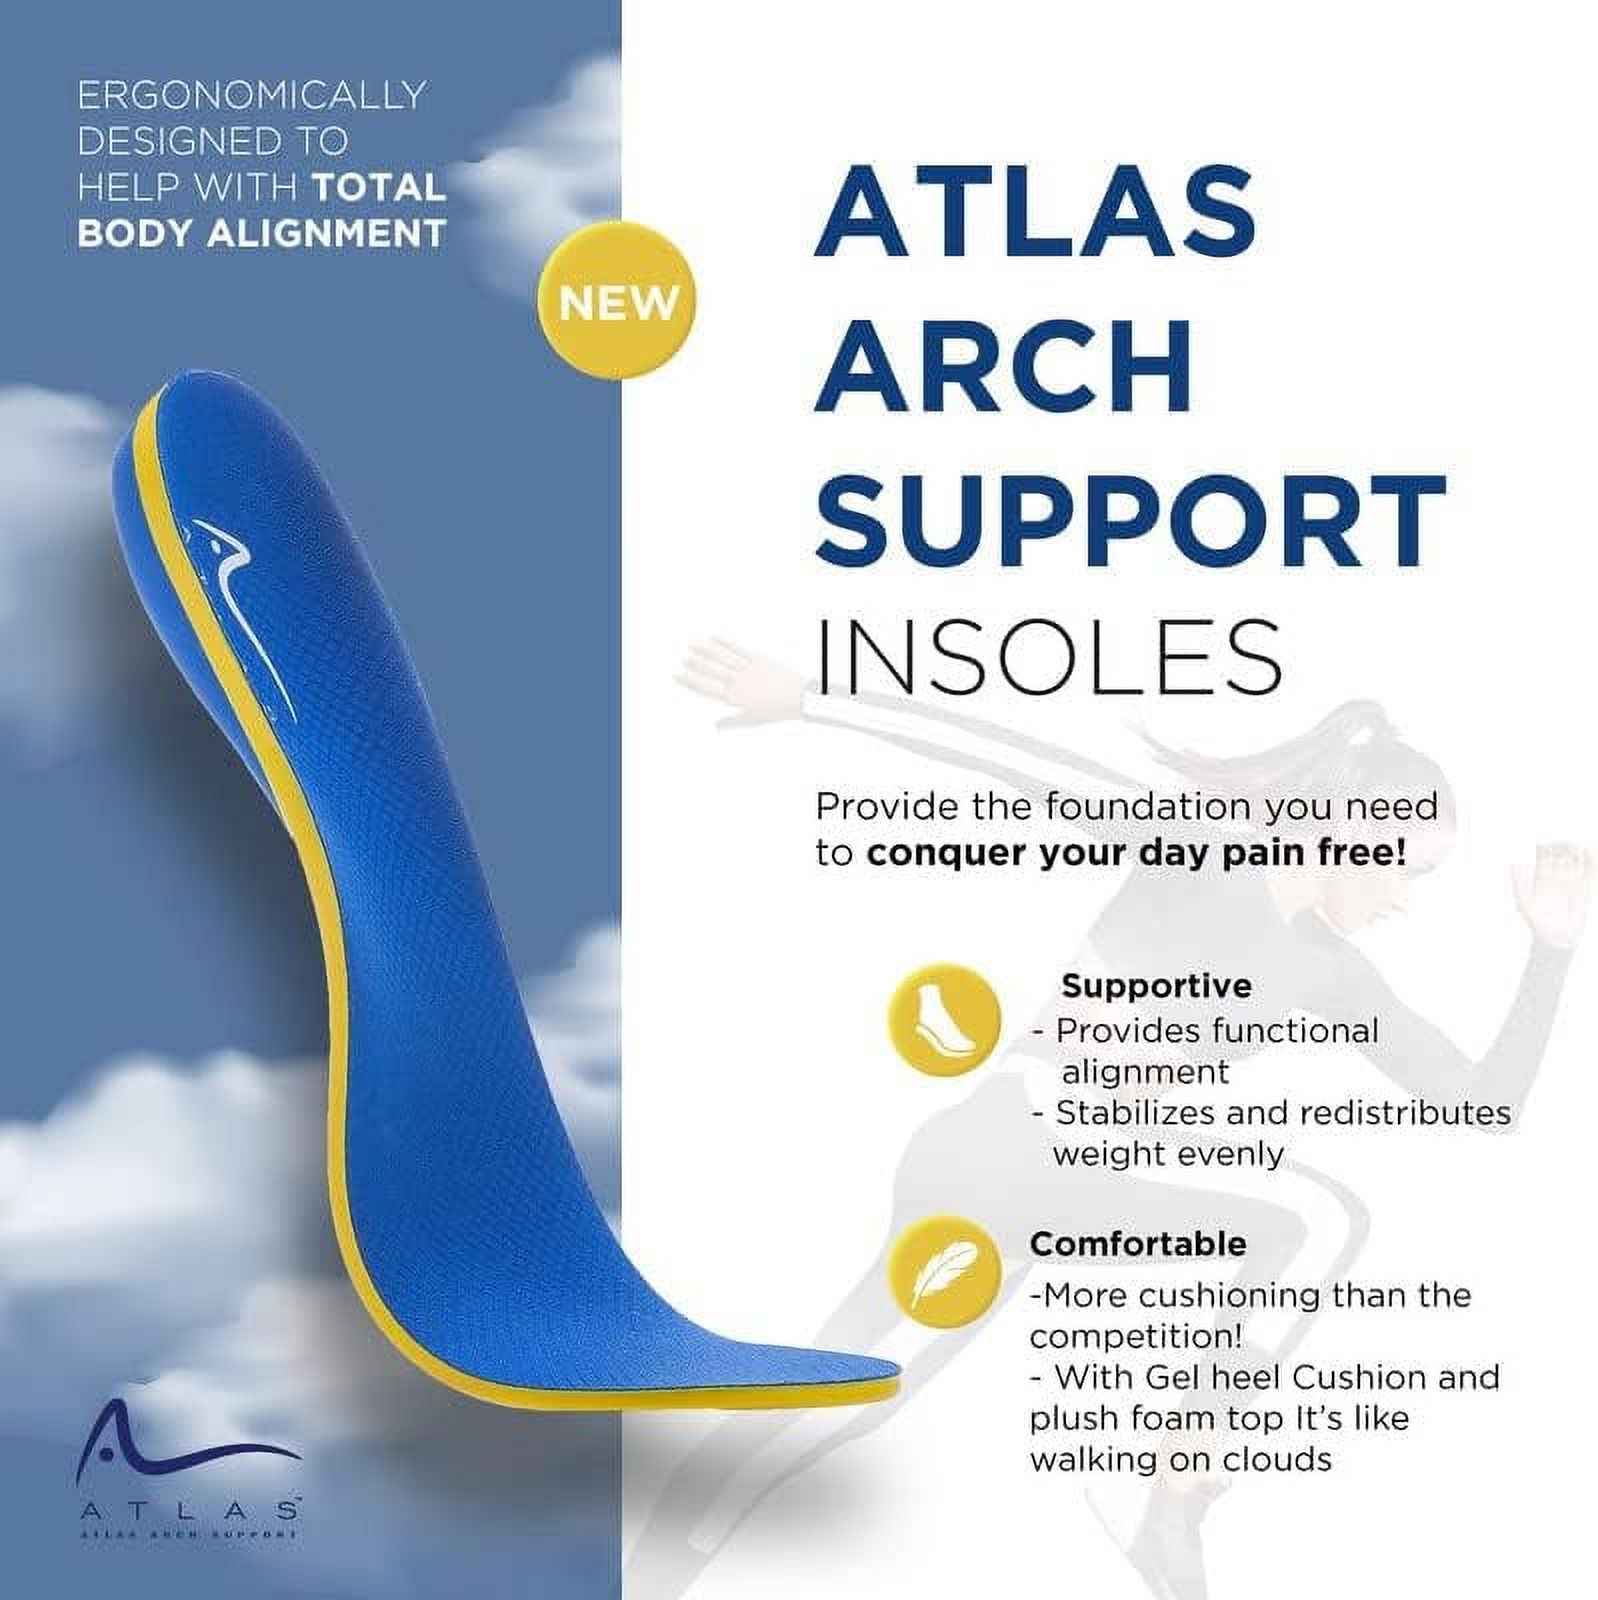 Orthopedic Running Insoles for Flat Feet,Plantar Fasciitis , High Arch, Ankle Pain and Foot Pain for Men and Women for Extra Arch Support - Atlas Arch Support - image 6 of 8